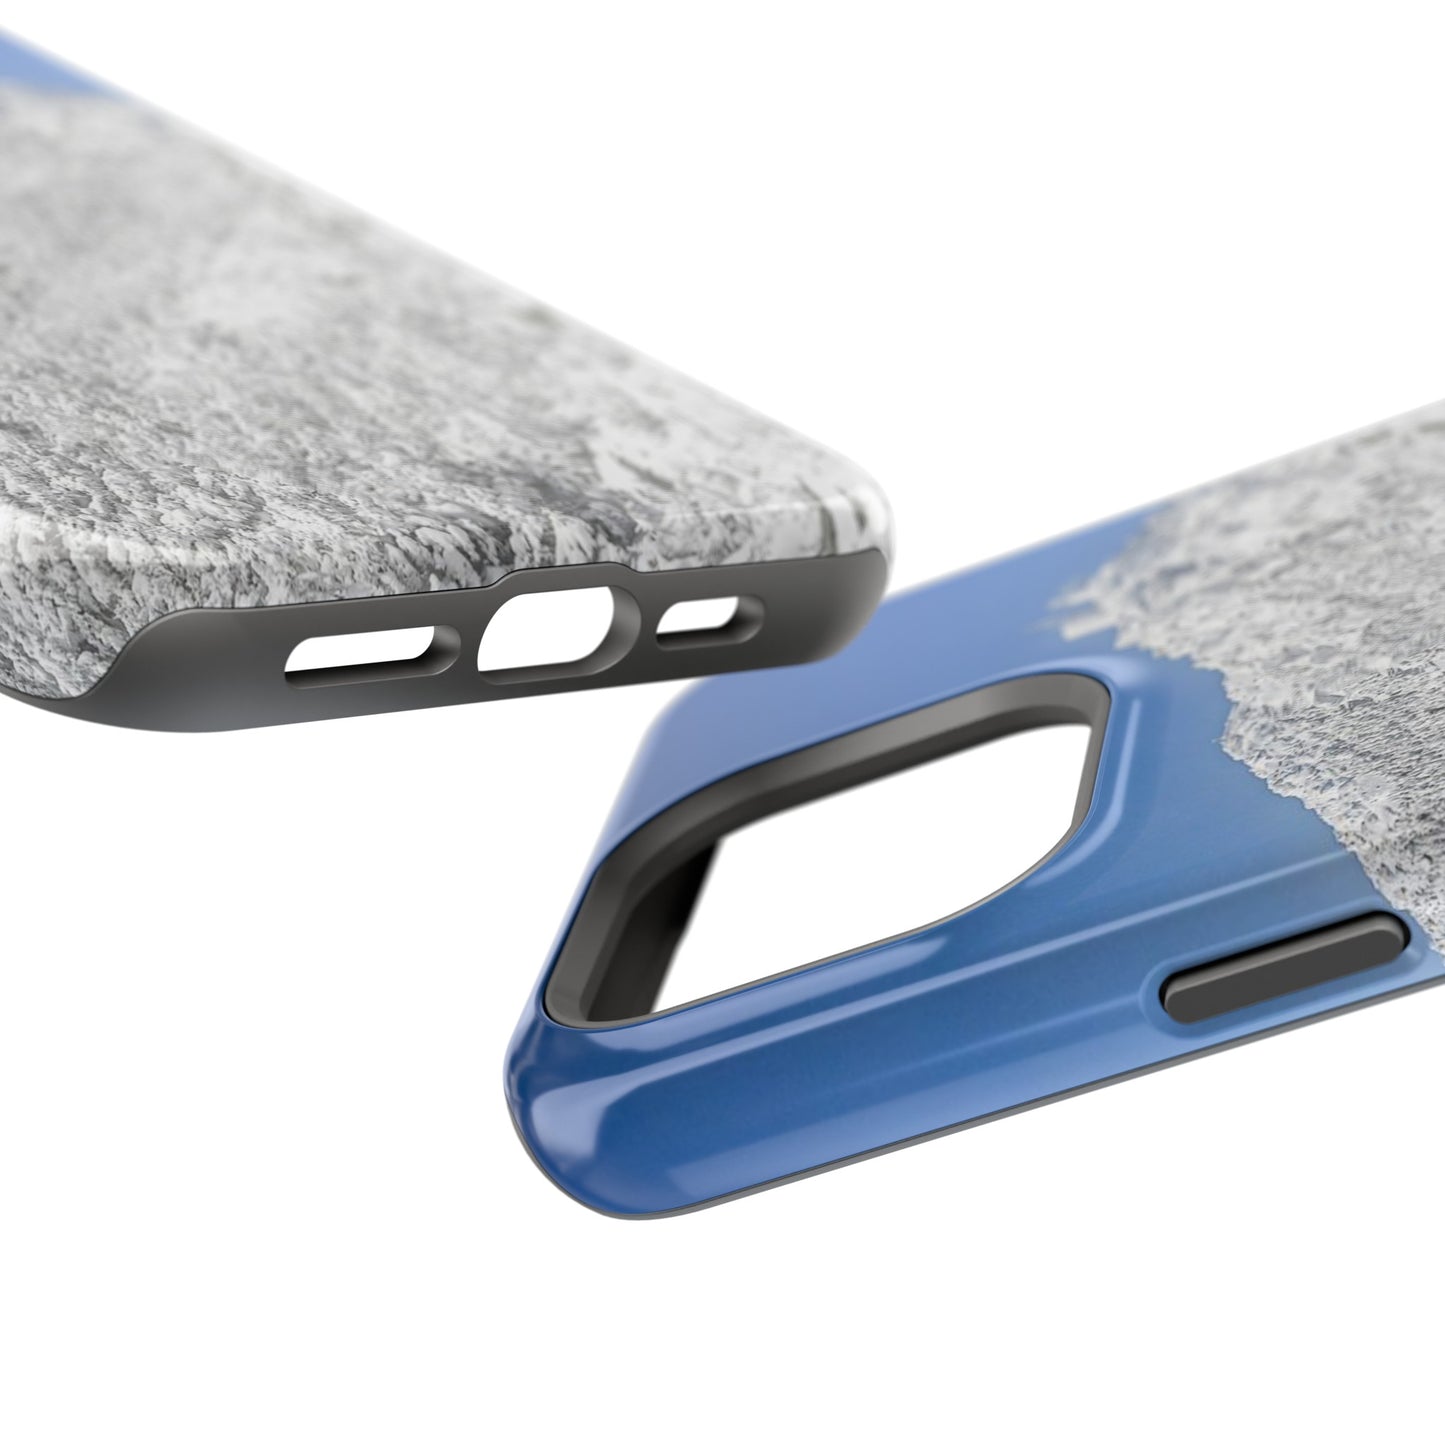 MagSafe Impact Resistant Phone Case - Whiteface Winter